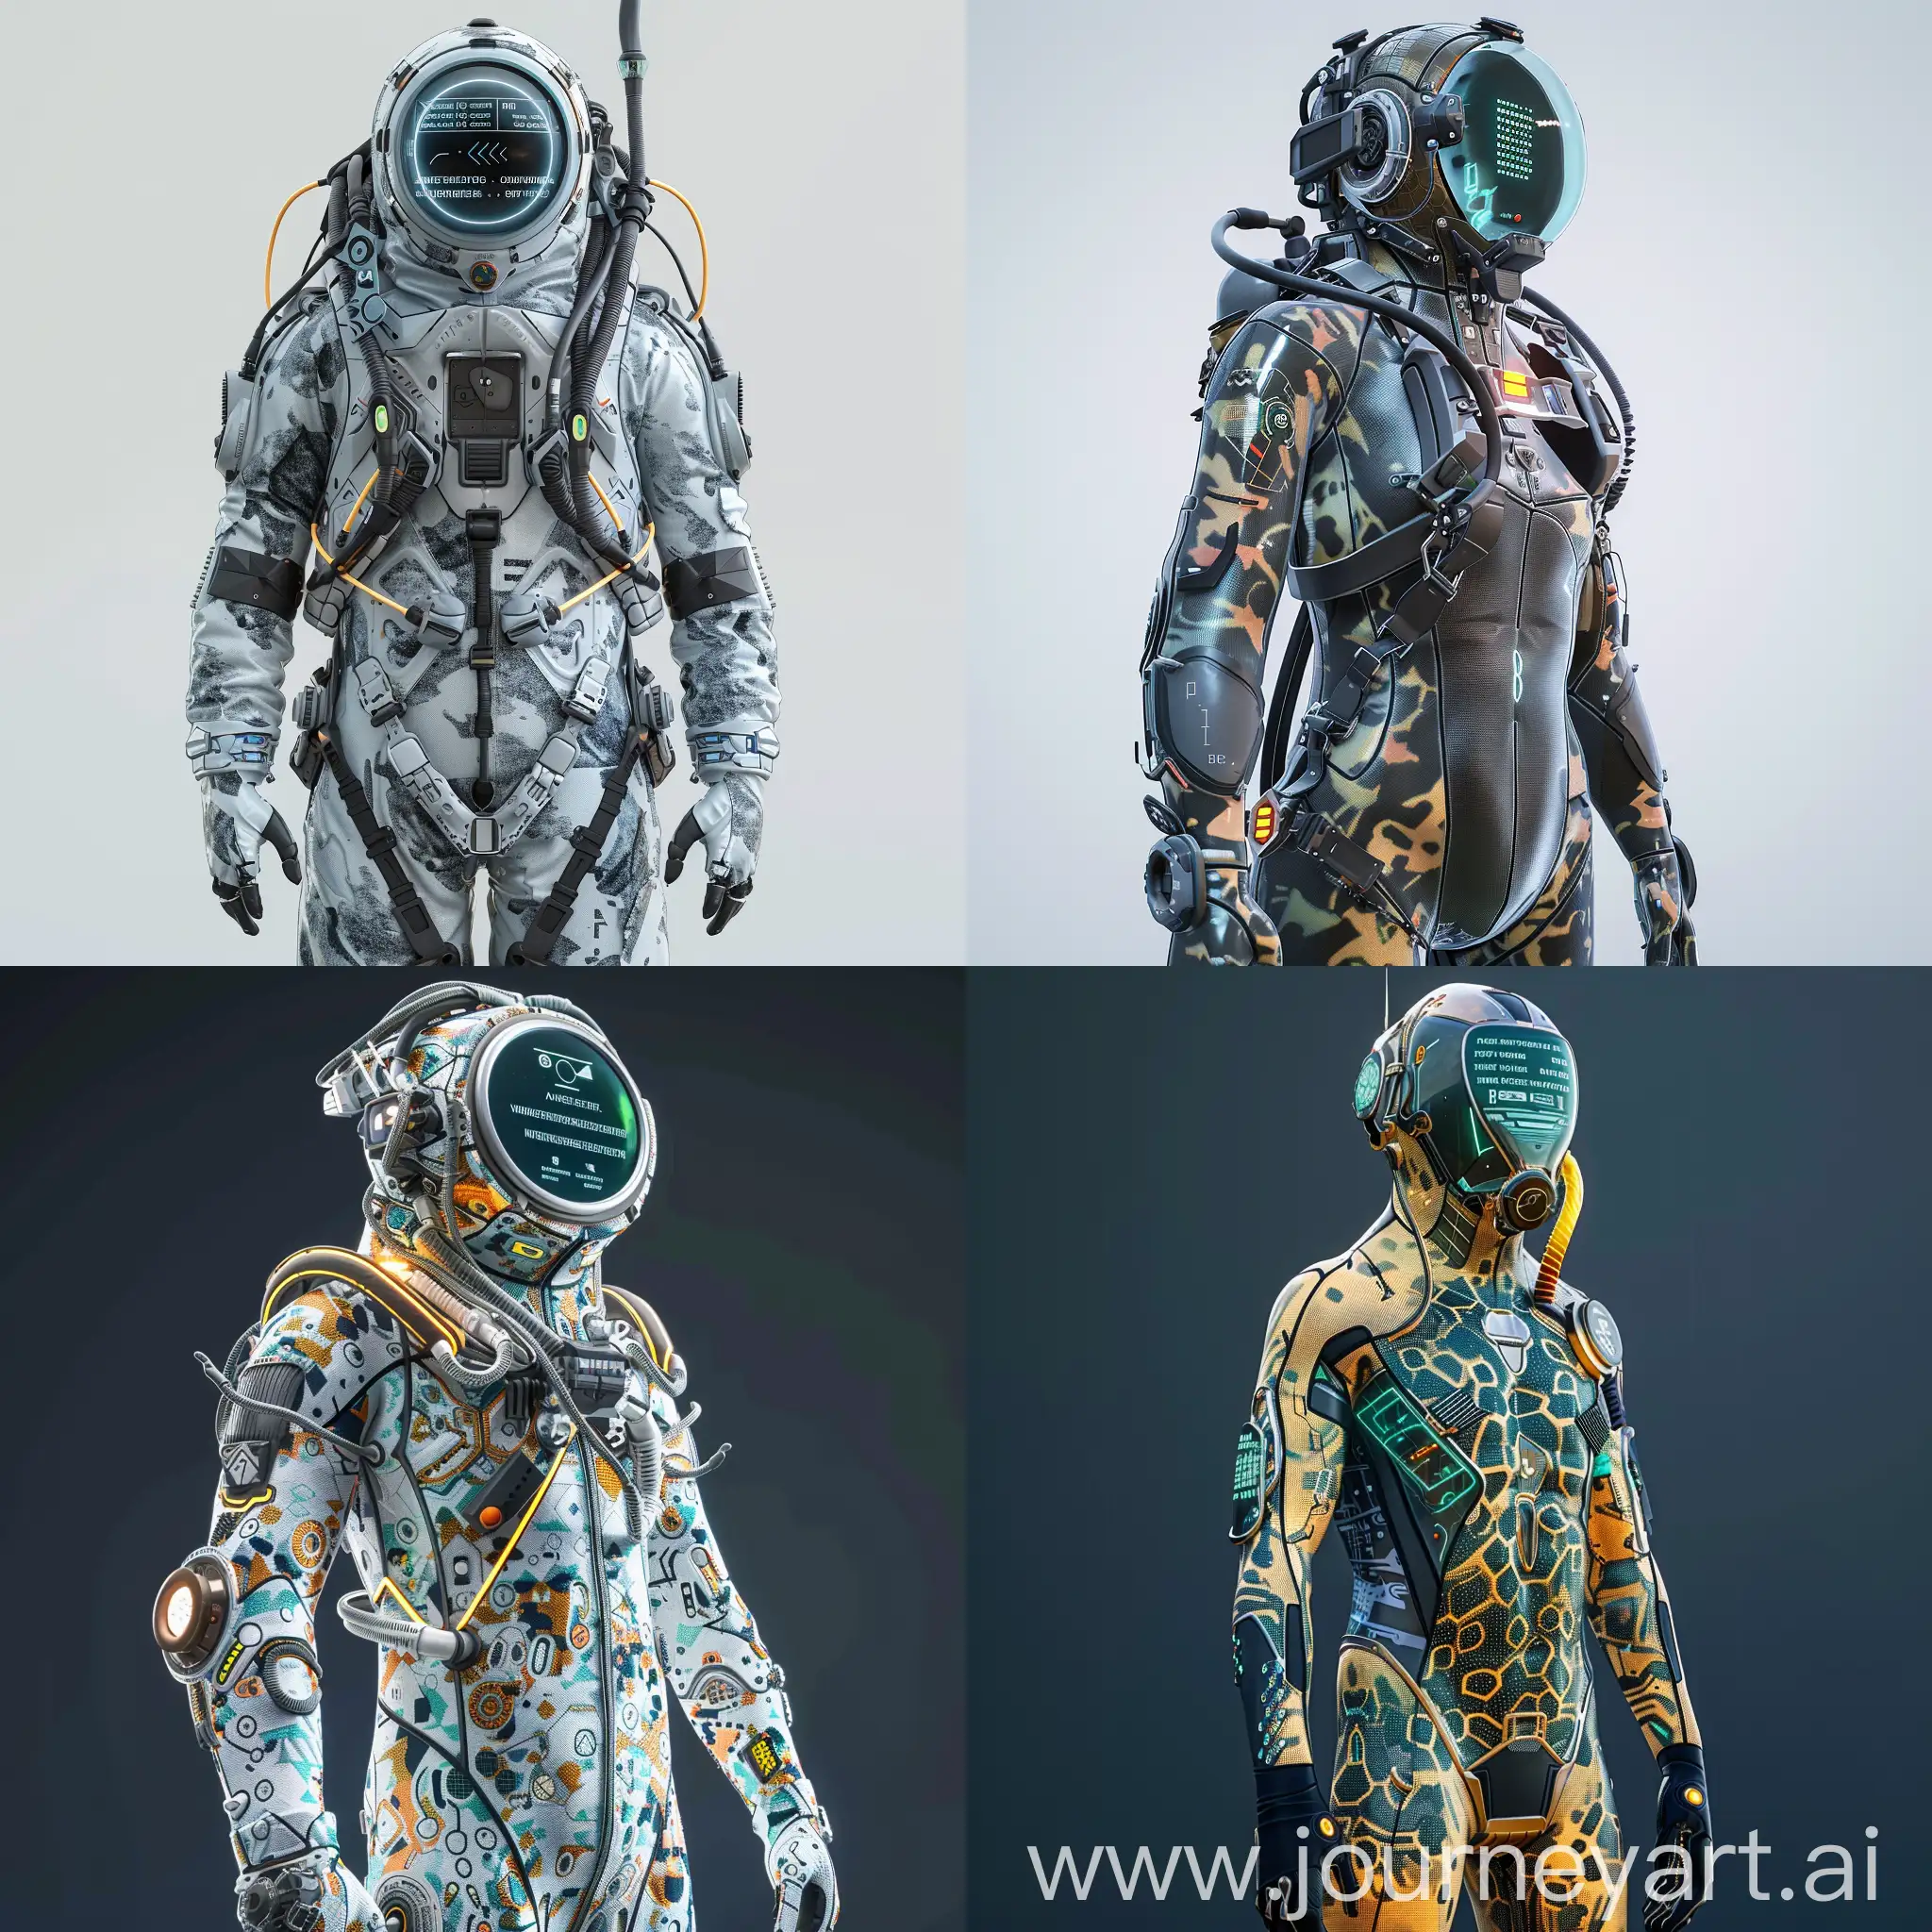 Futuristic-Divers-Costume-with-Integrated-HUD-and-Adaptive-Camouflage-Skin